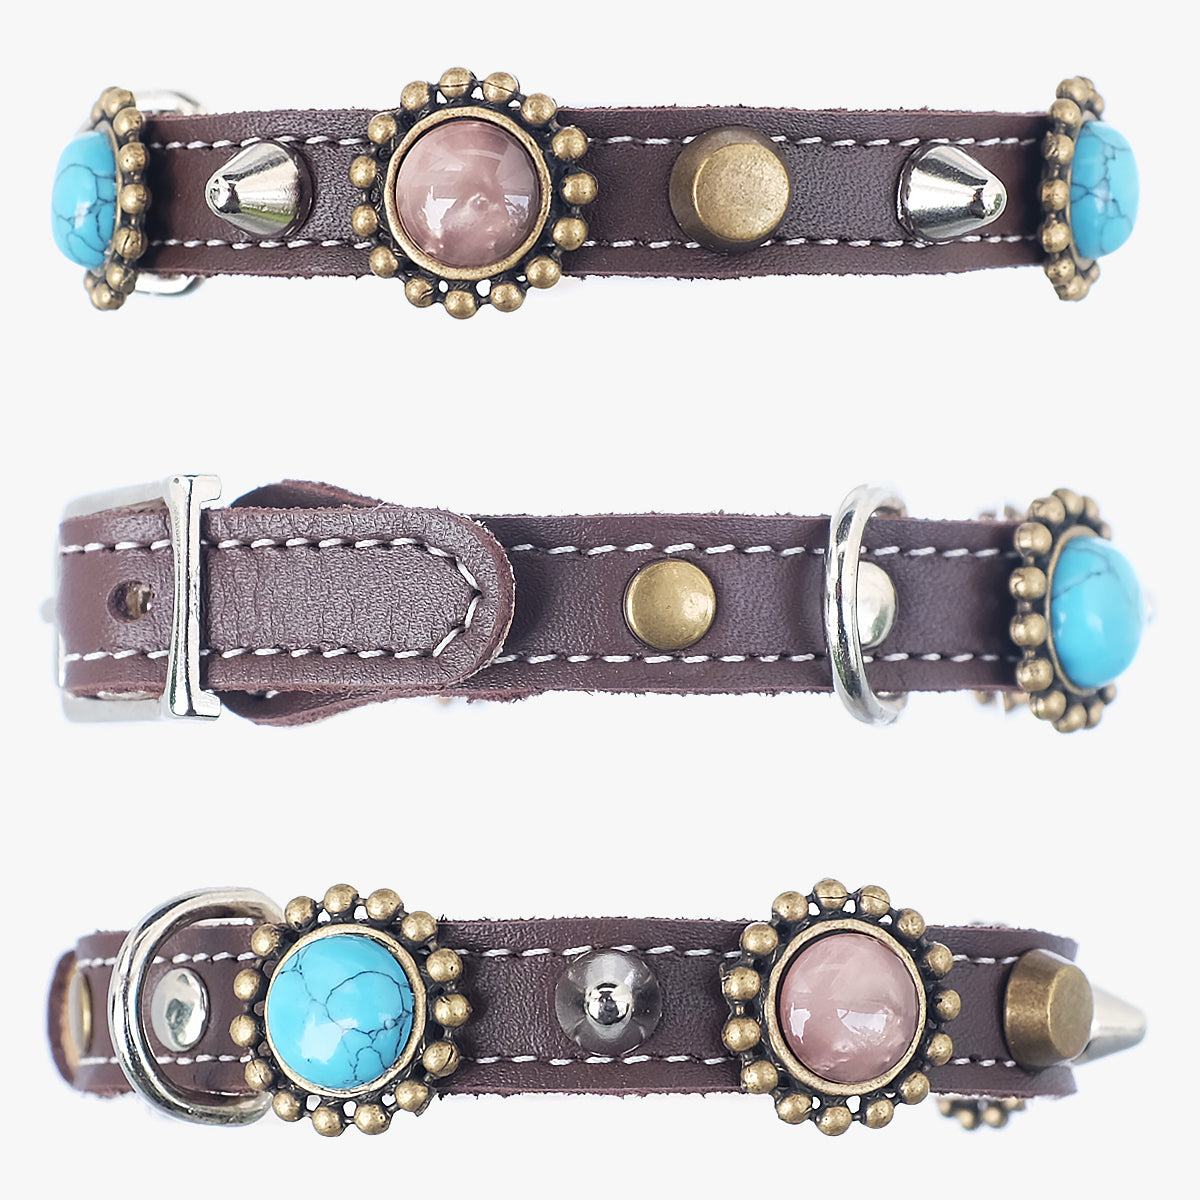 Superpipapo Luxury Leather Cat Collar, With Studs, Spikes, & Earth Stones | at Made Moggie